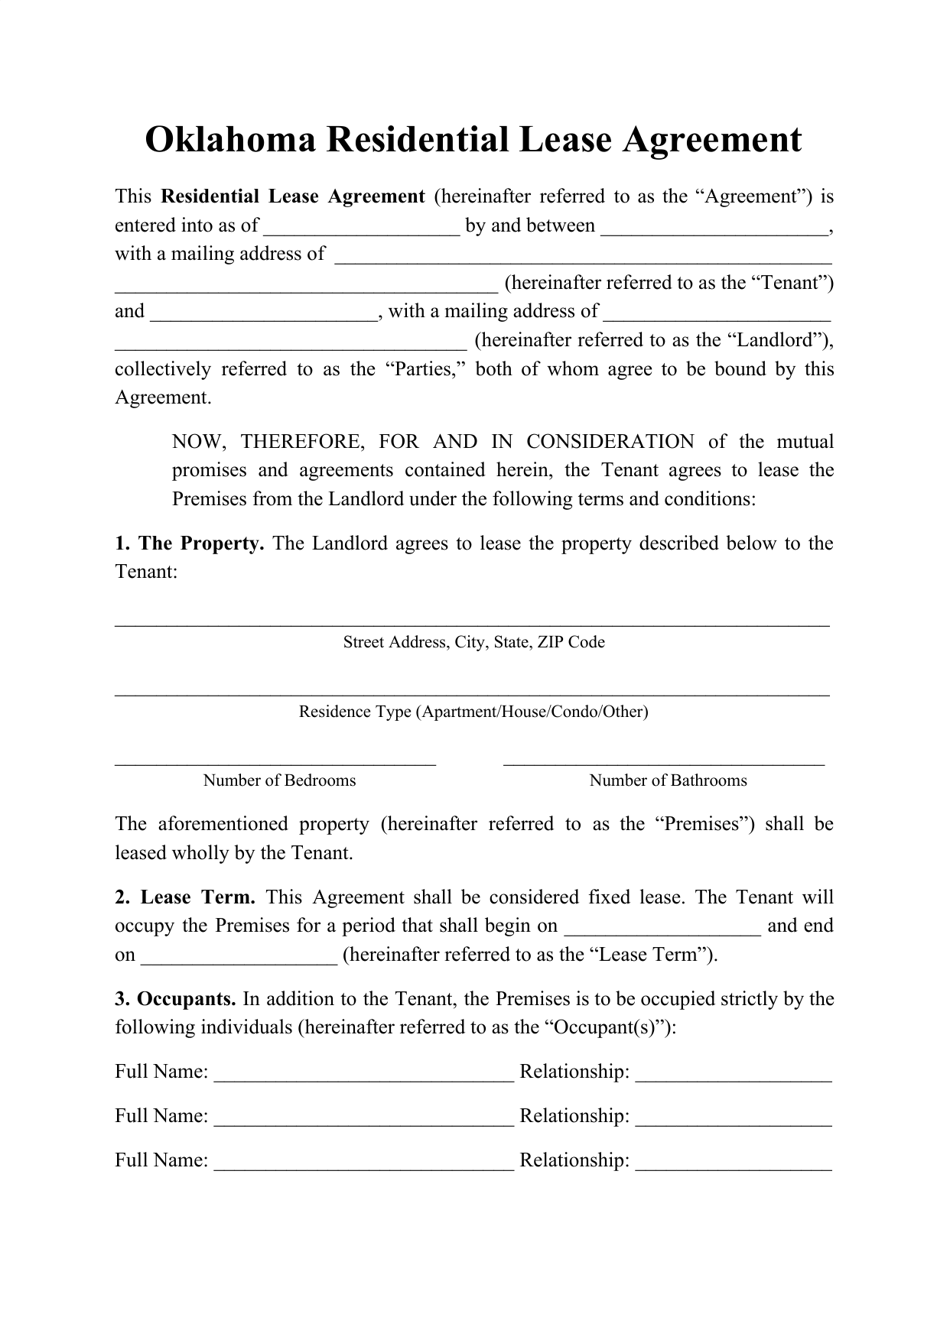 oklahoma-residential-lease-agreement-template-fill-out-sign-online